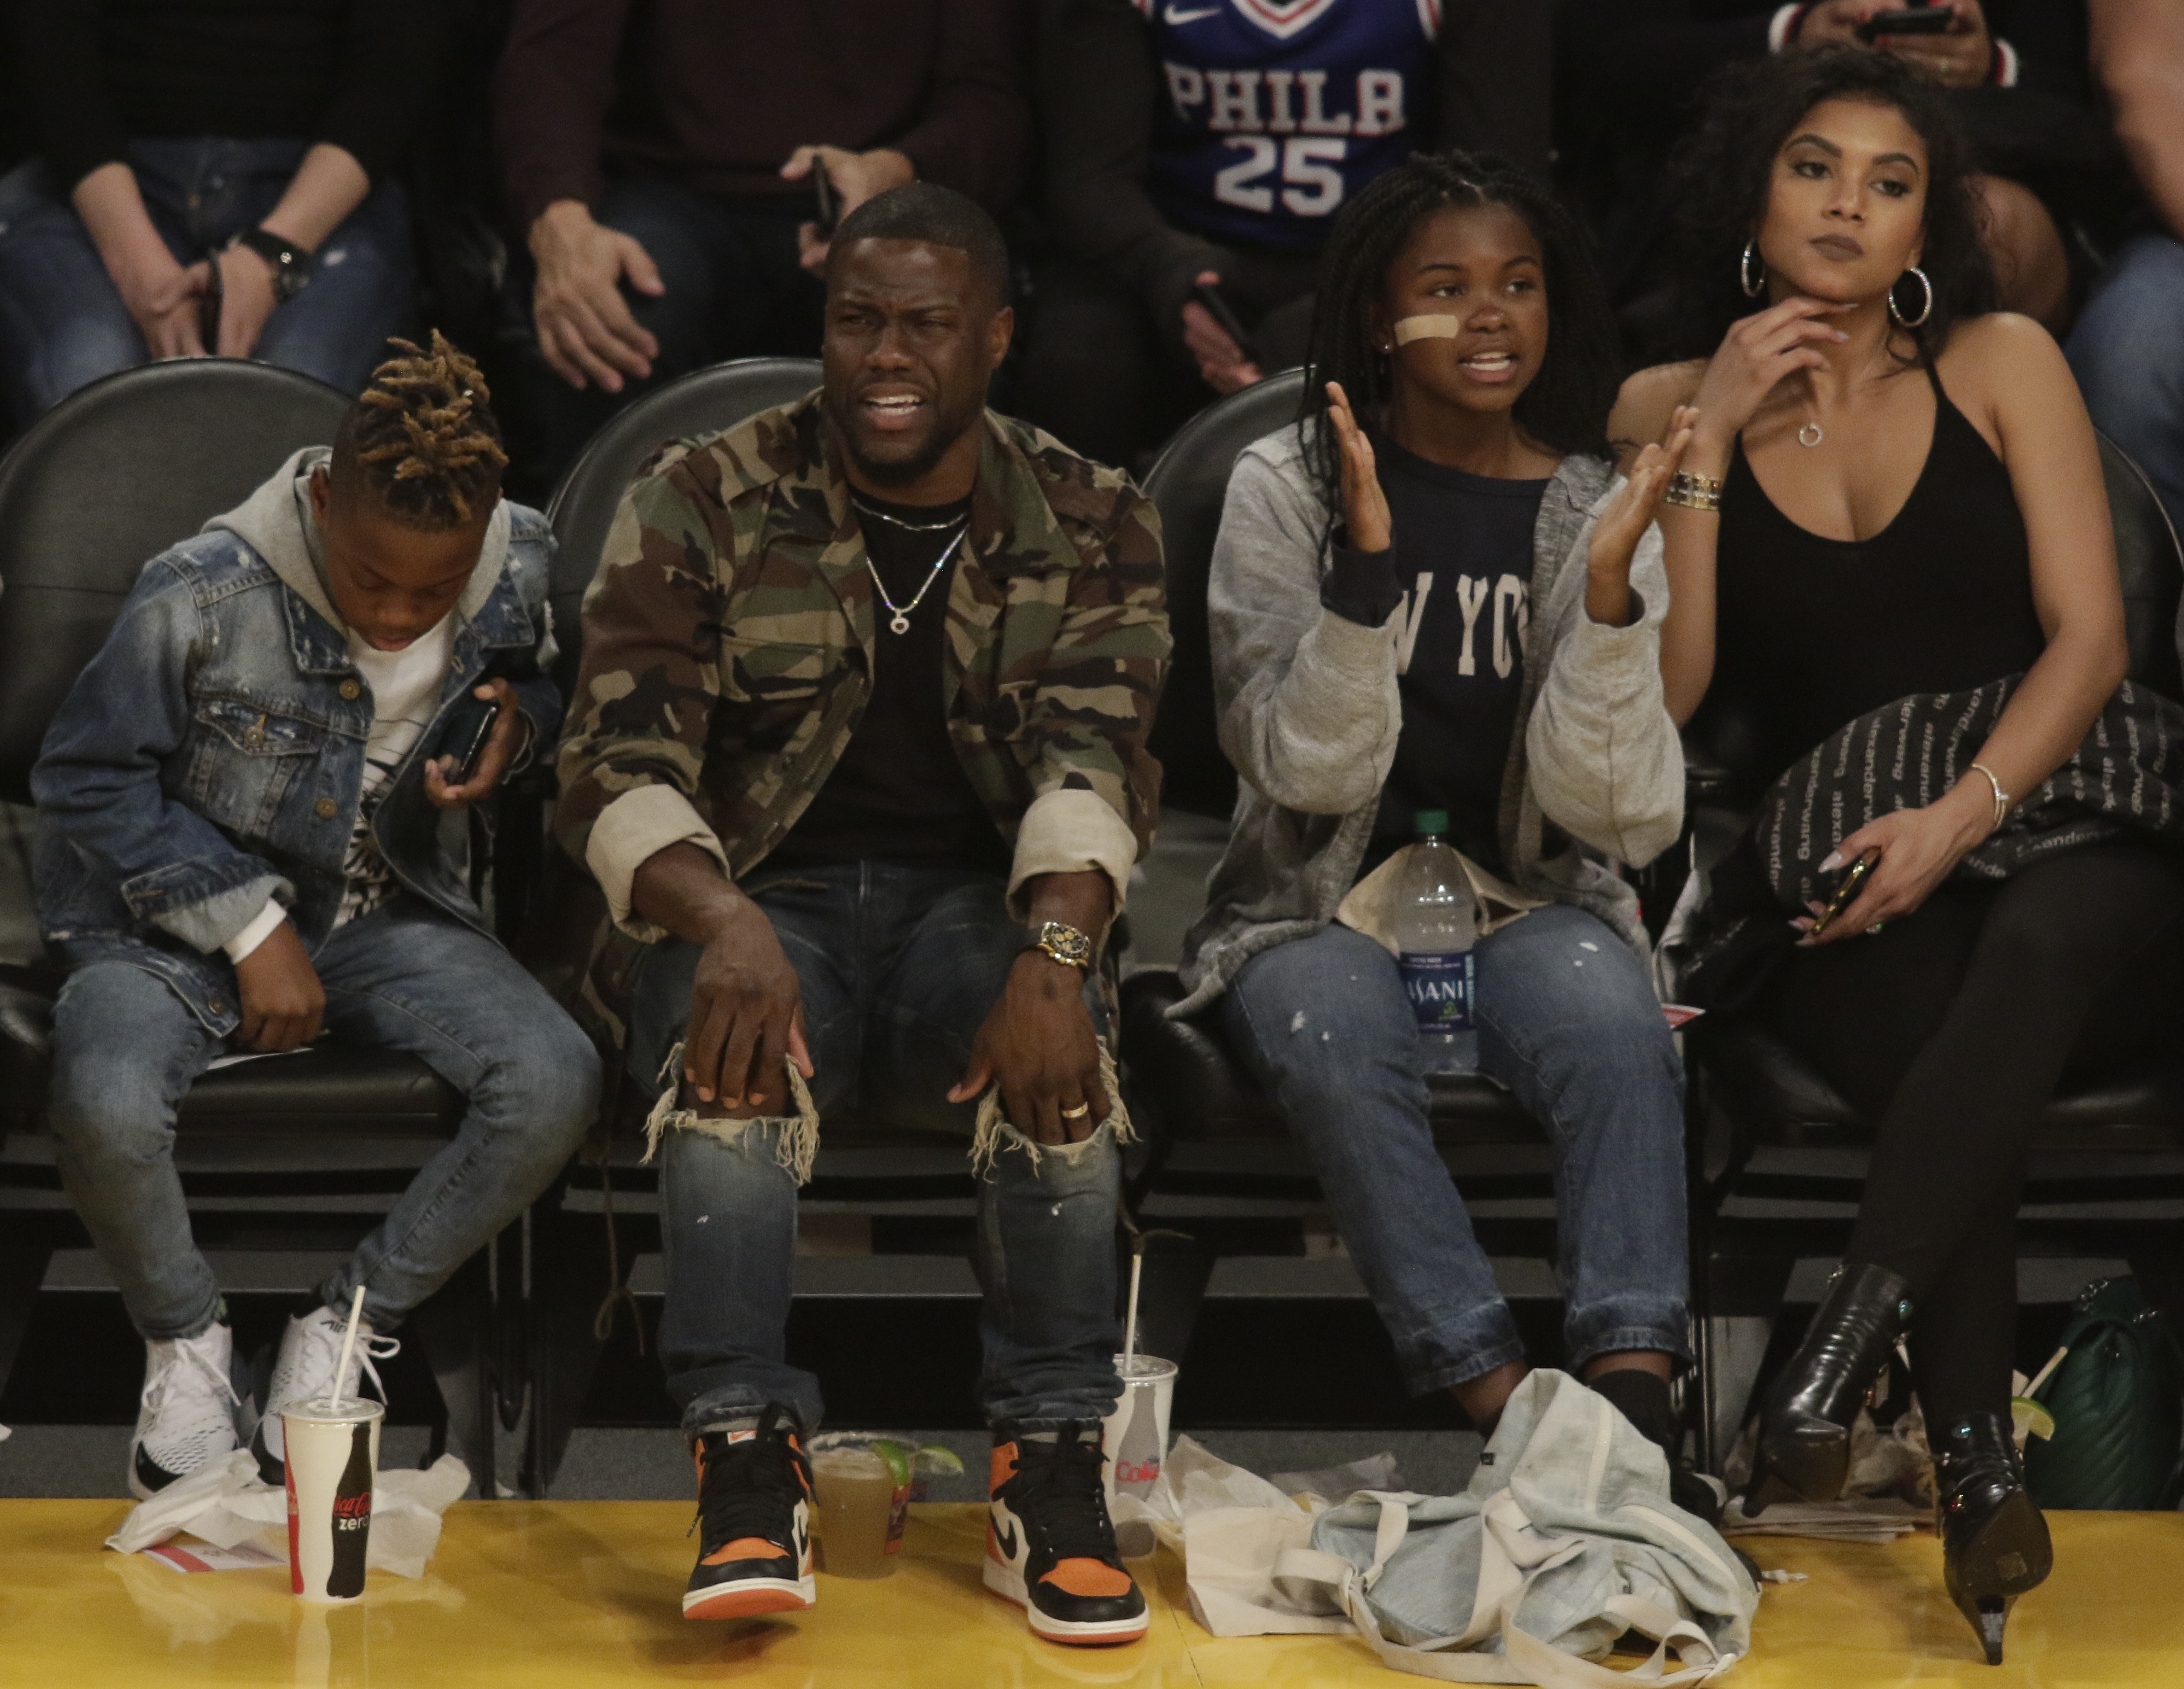 Vintage photos of celebrities courtside at Lakers games